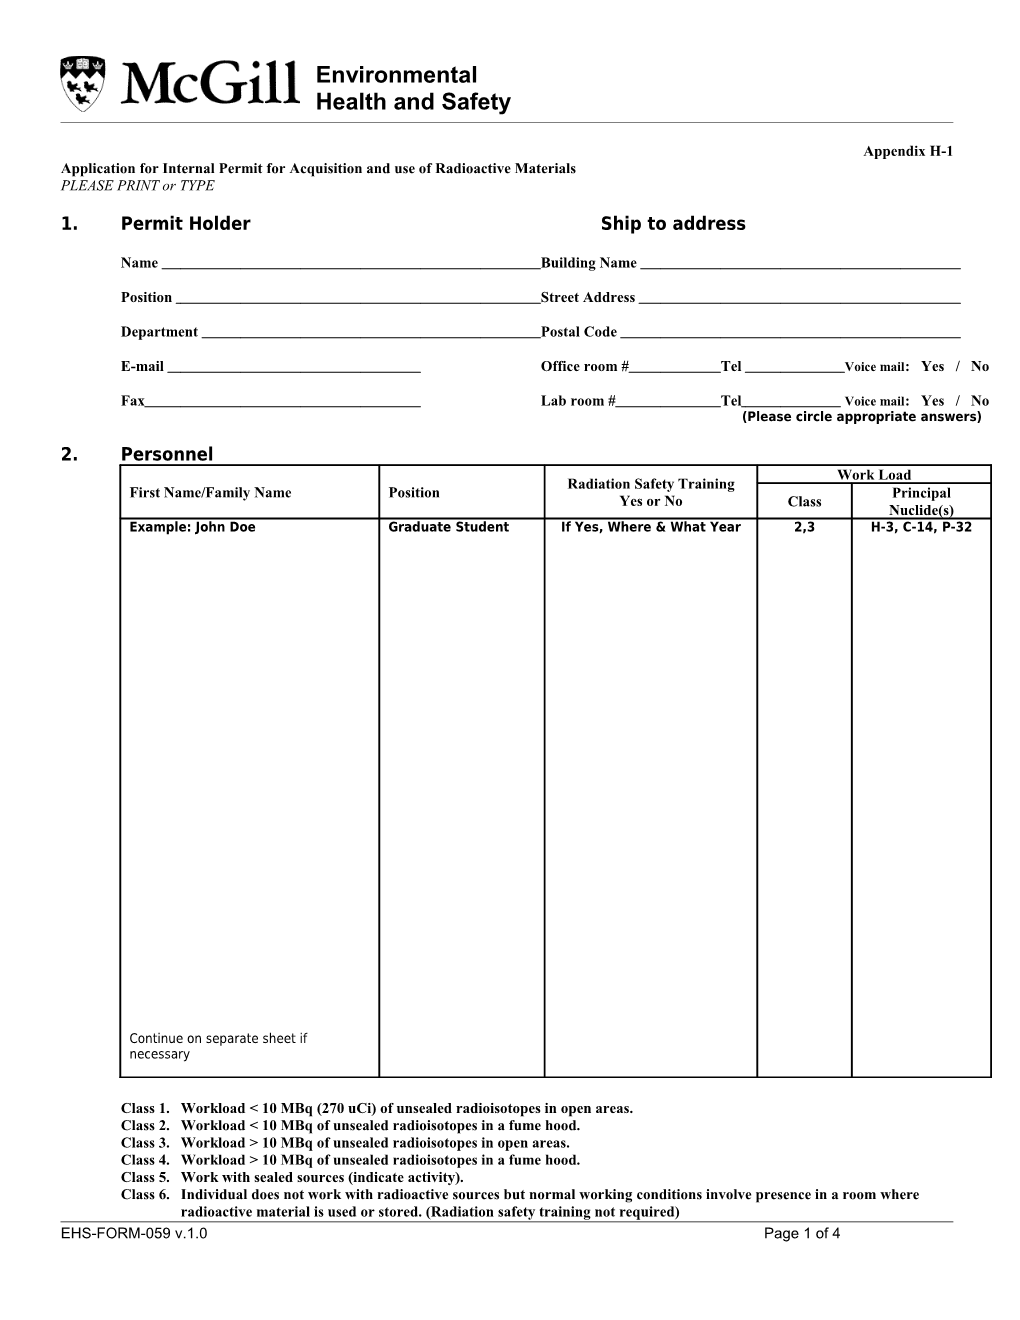 Application for Internal Permit for Acquisition and Use of Radioactive Materials